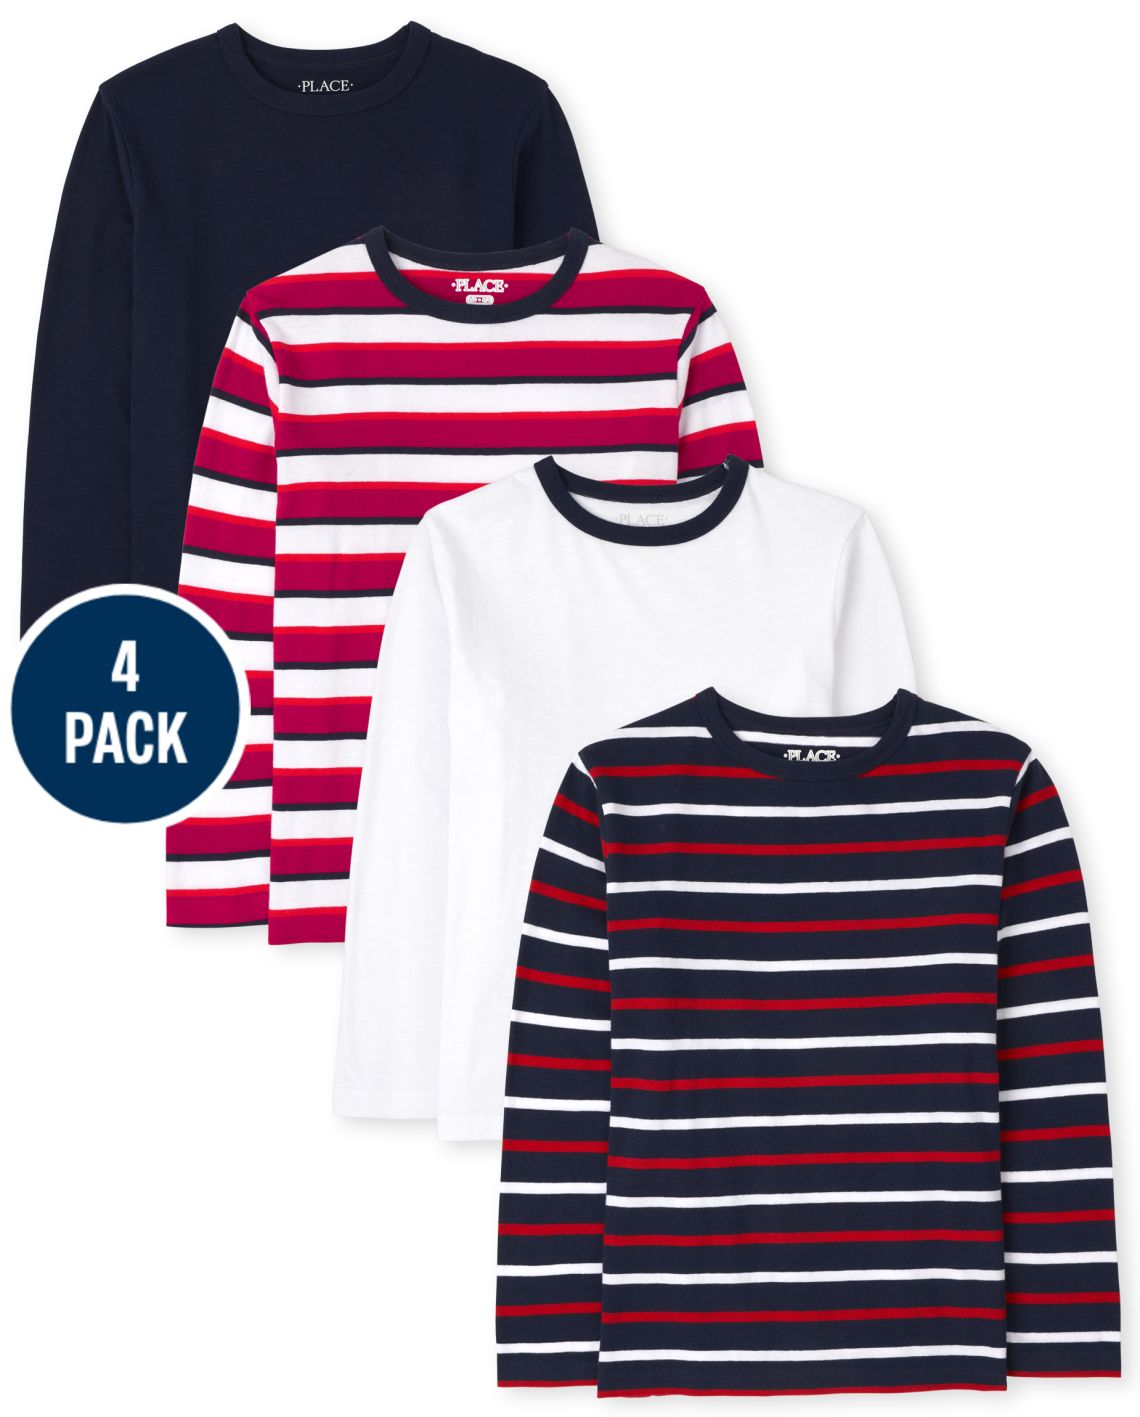 4-Pack The Children's Place Boys Striped Top (Multi Colors)